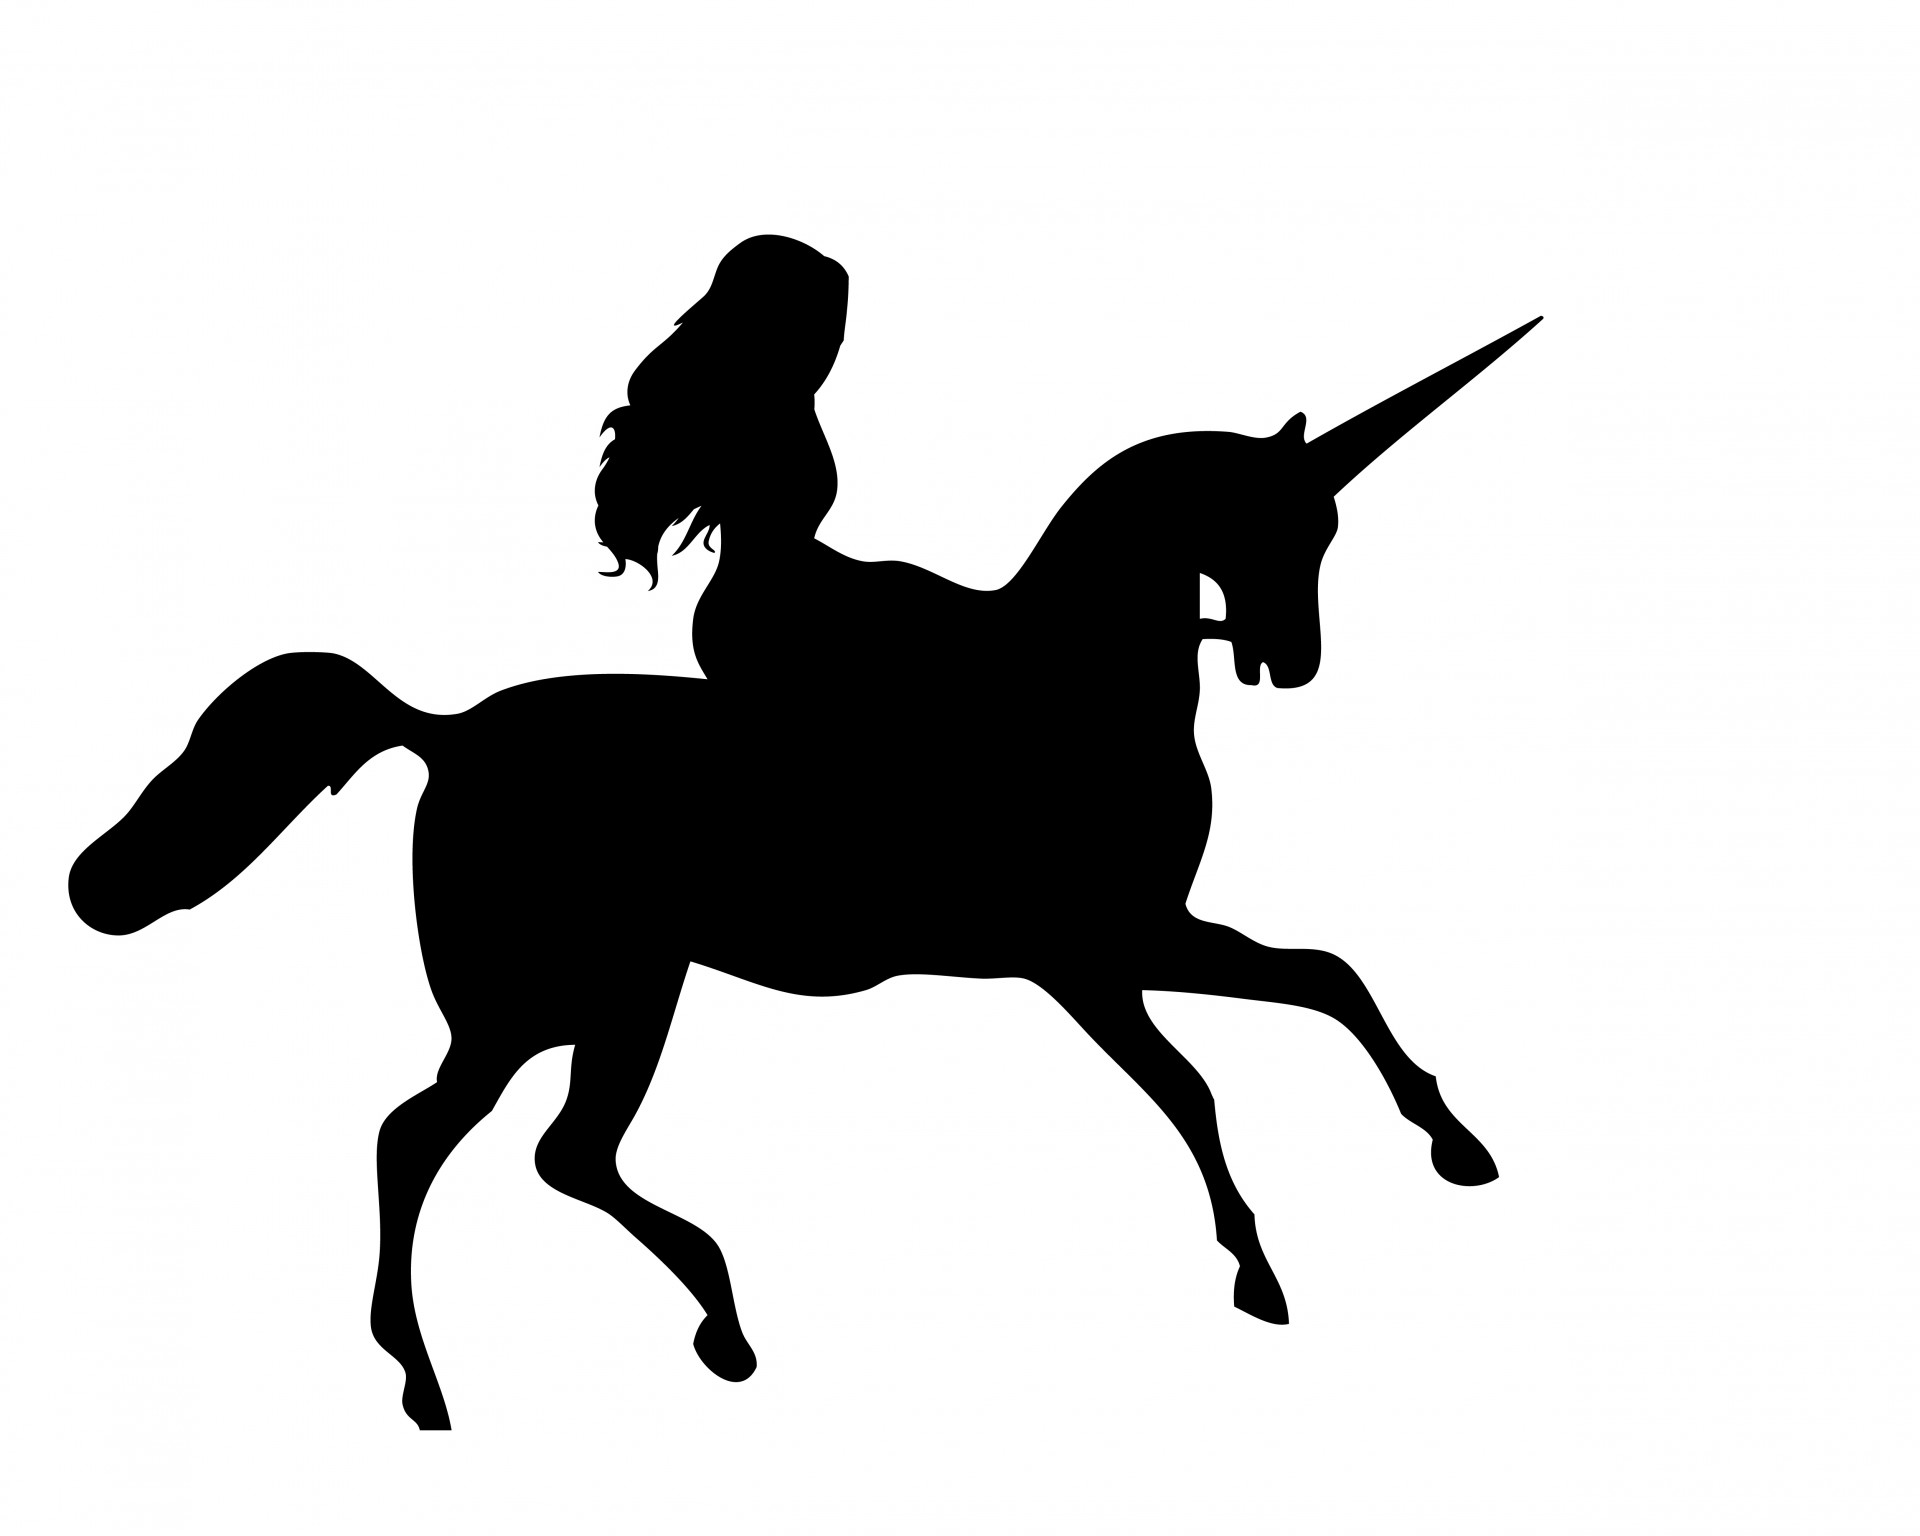 Black silhouette of a beautiful young woman riding a unicorn